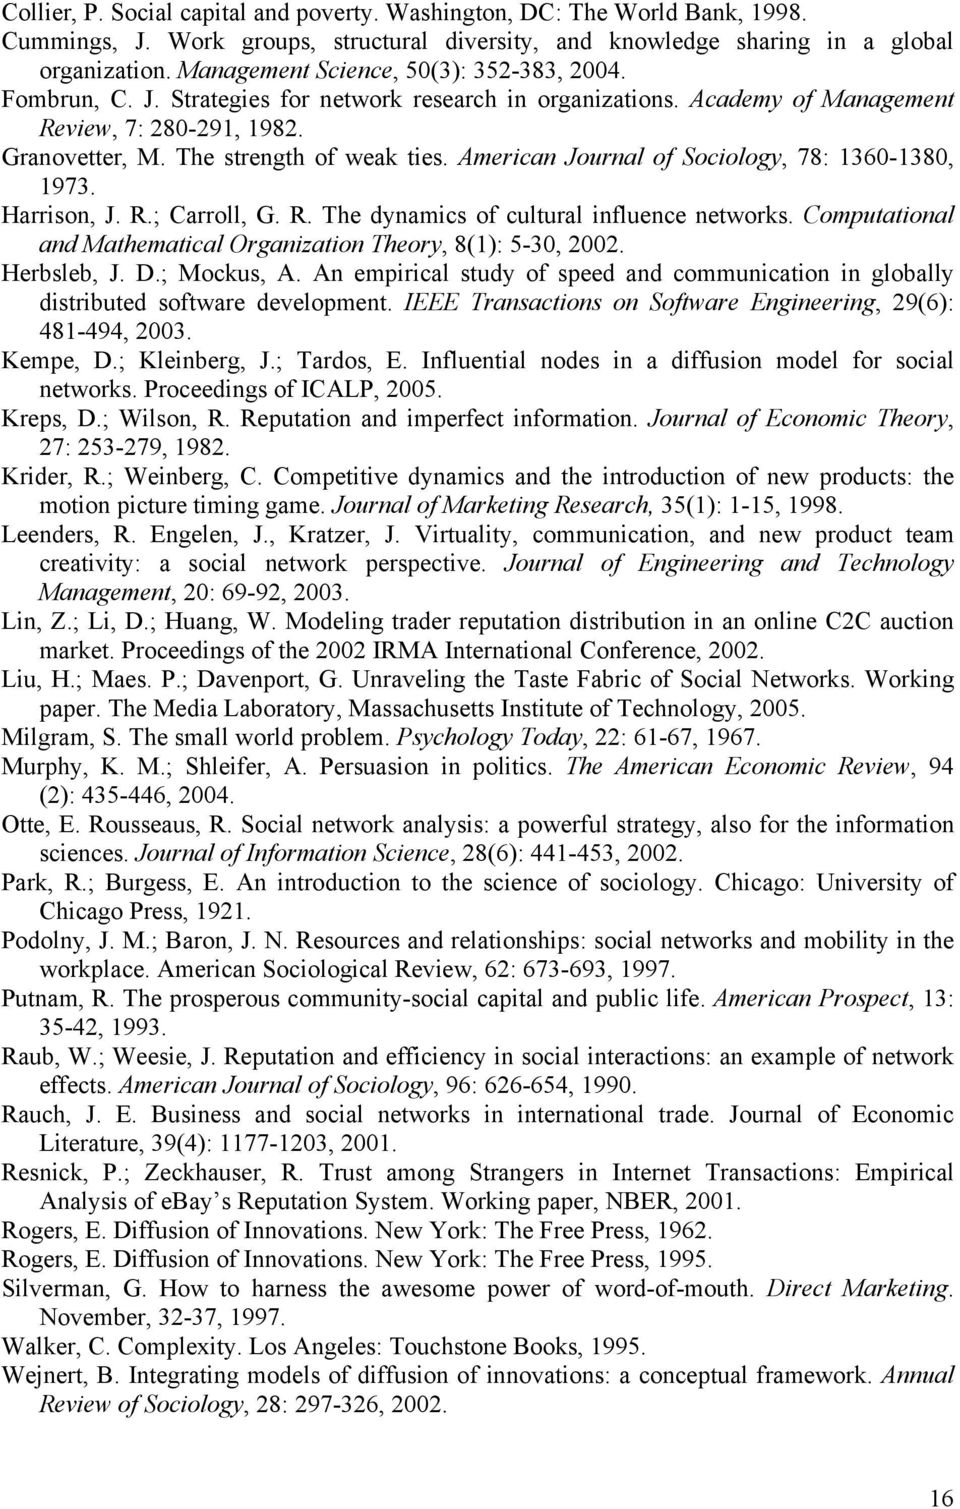 American Journal of Sociology, 78: 1360-1380, 1973. Harrison, J. R.; Carroll, G. R. The dynamics of cultural influence networks. Computational and Mathematical Organization Theory, 8(1): 5-30, 2002.